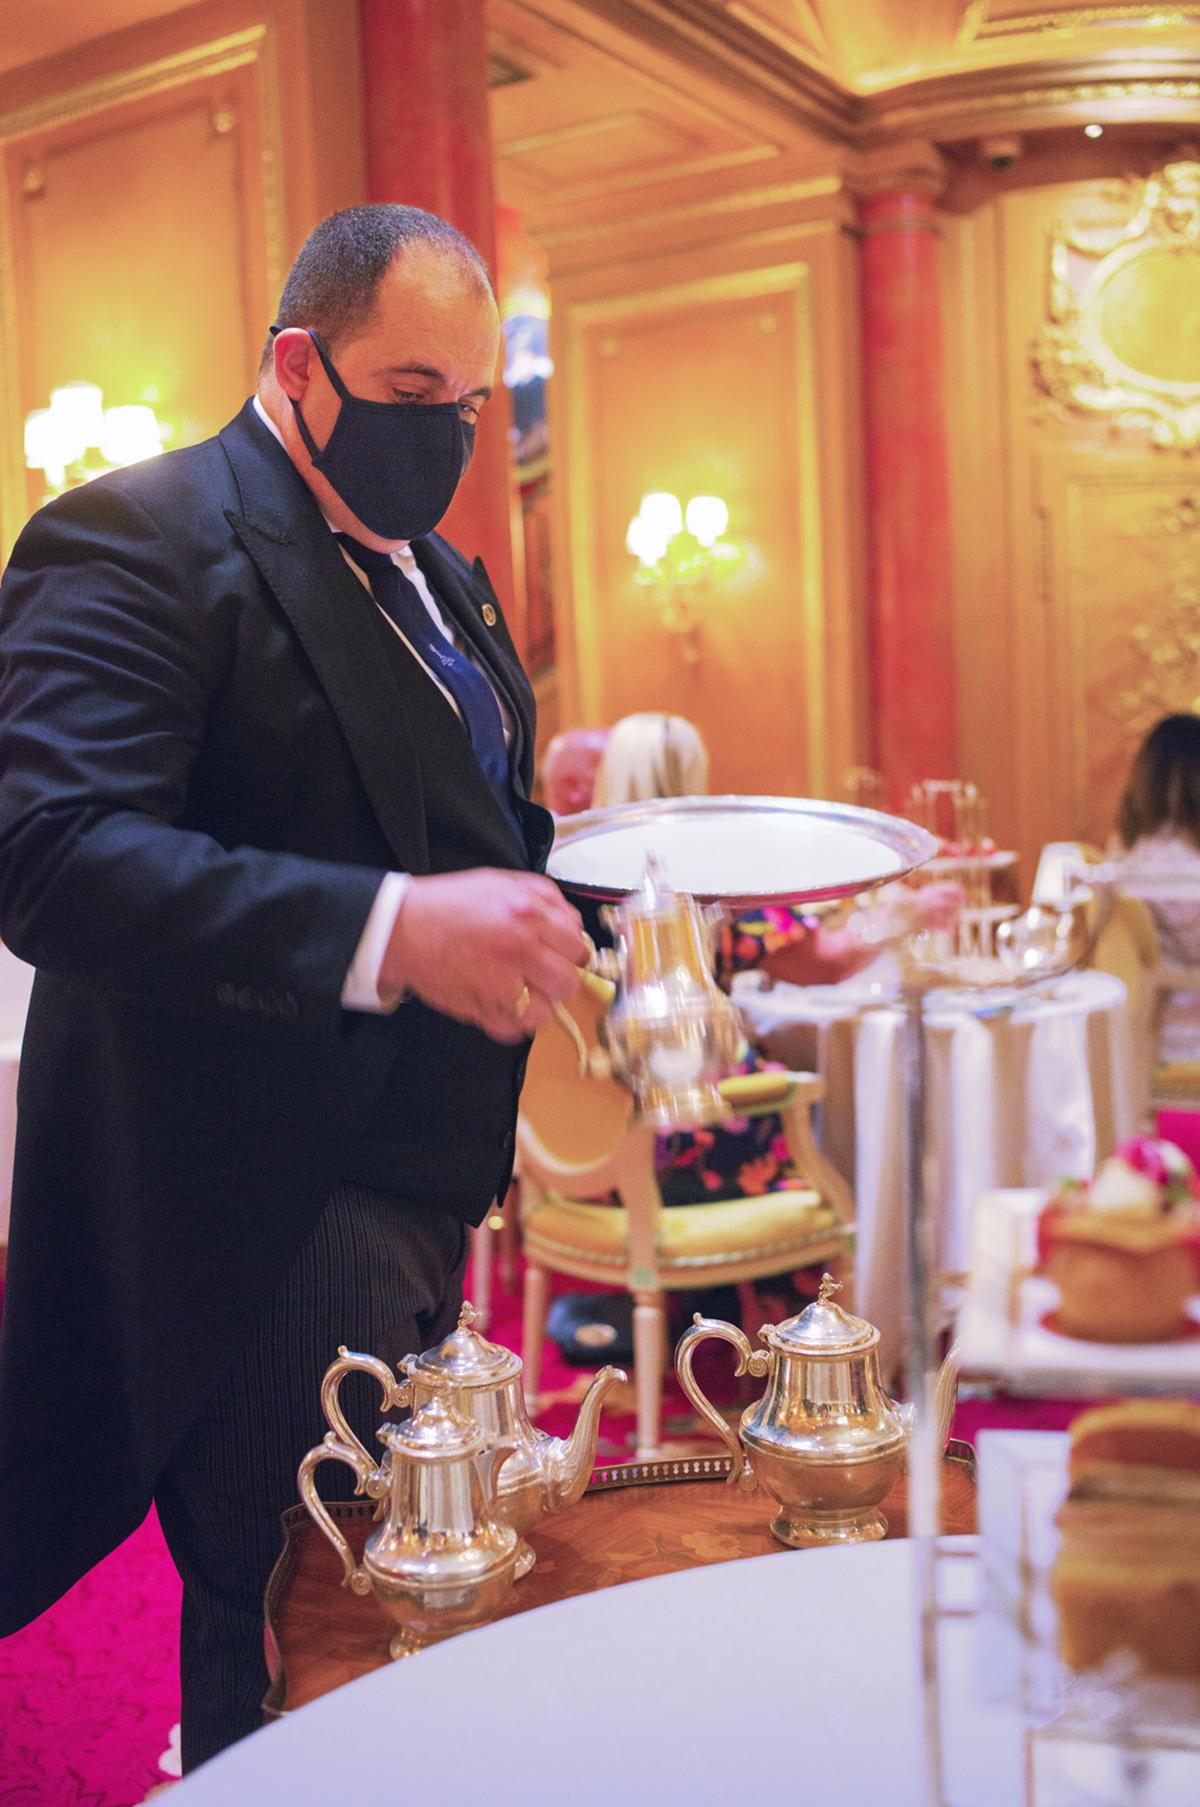 Giancomenic Scanu, deputy manager of The Palm Court, serving afternoon tea, The Ritz London. (Alan Behr/TNS)